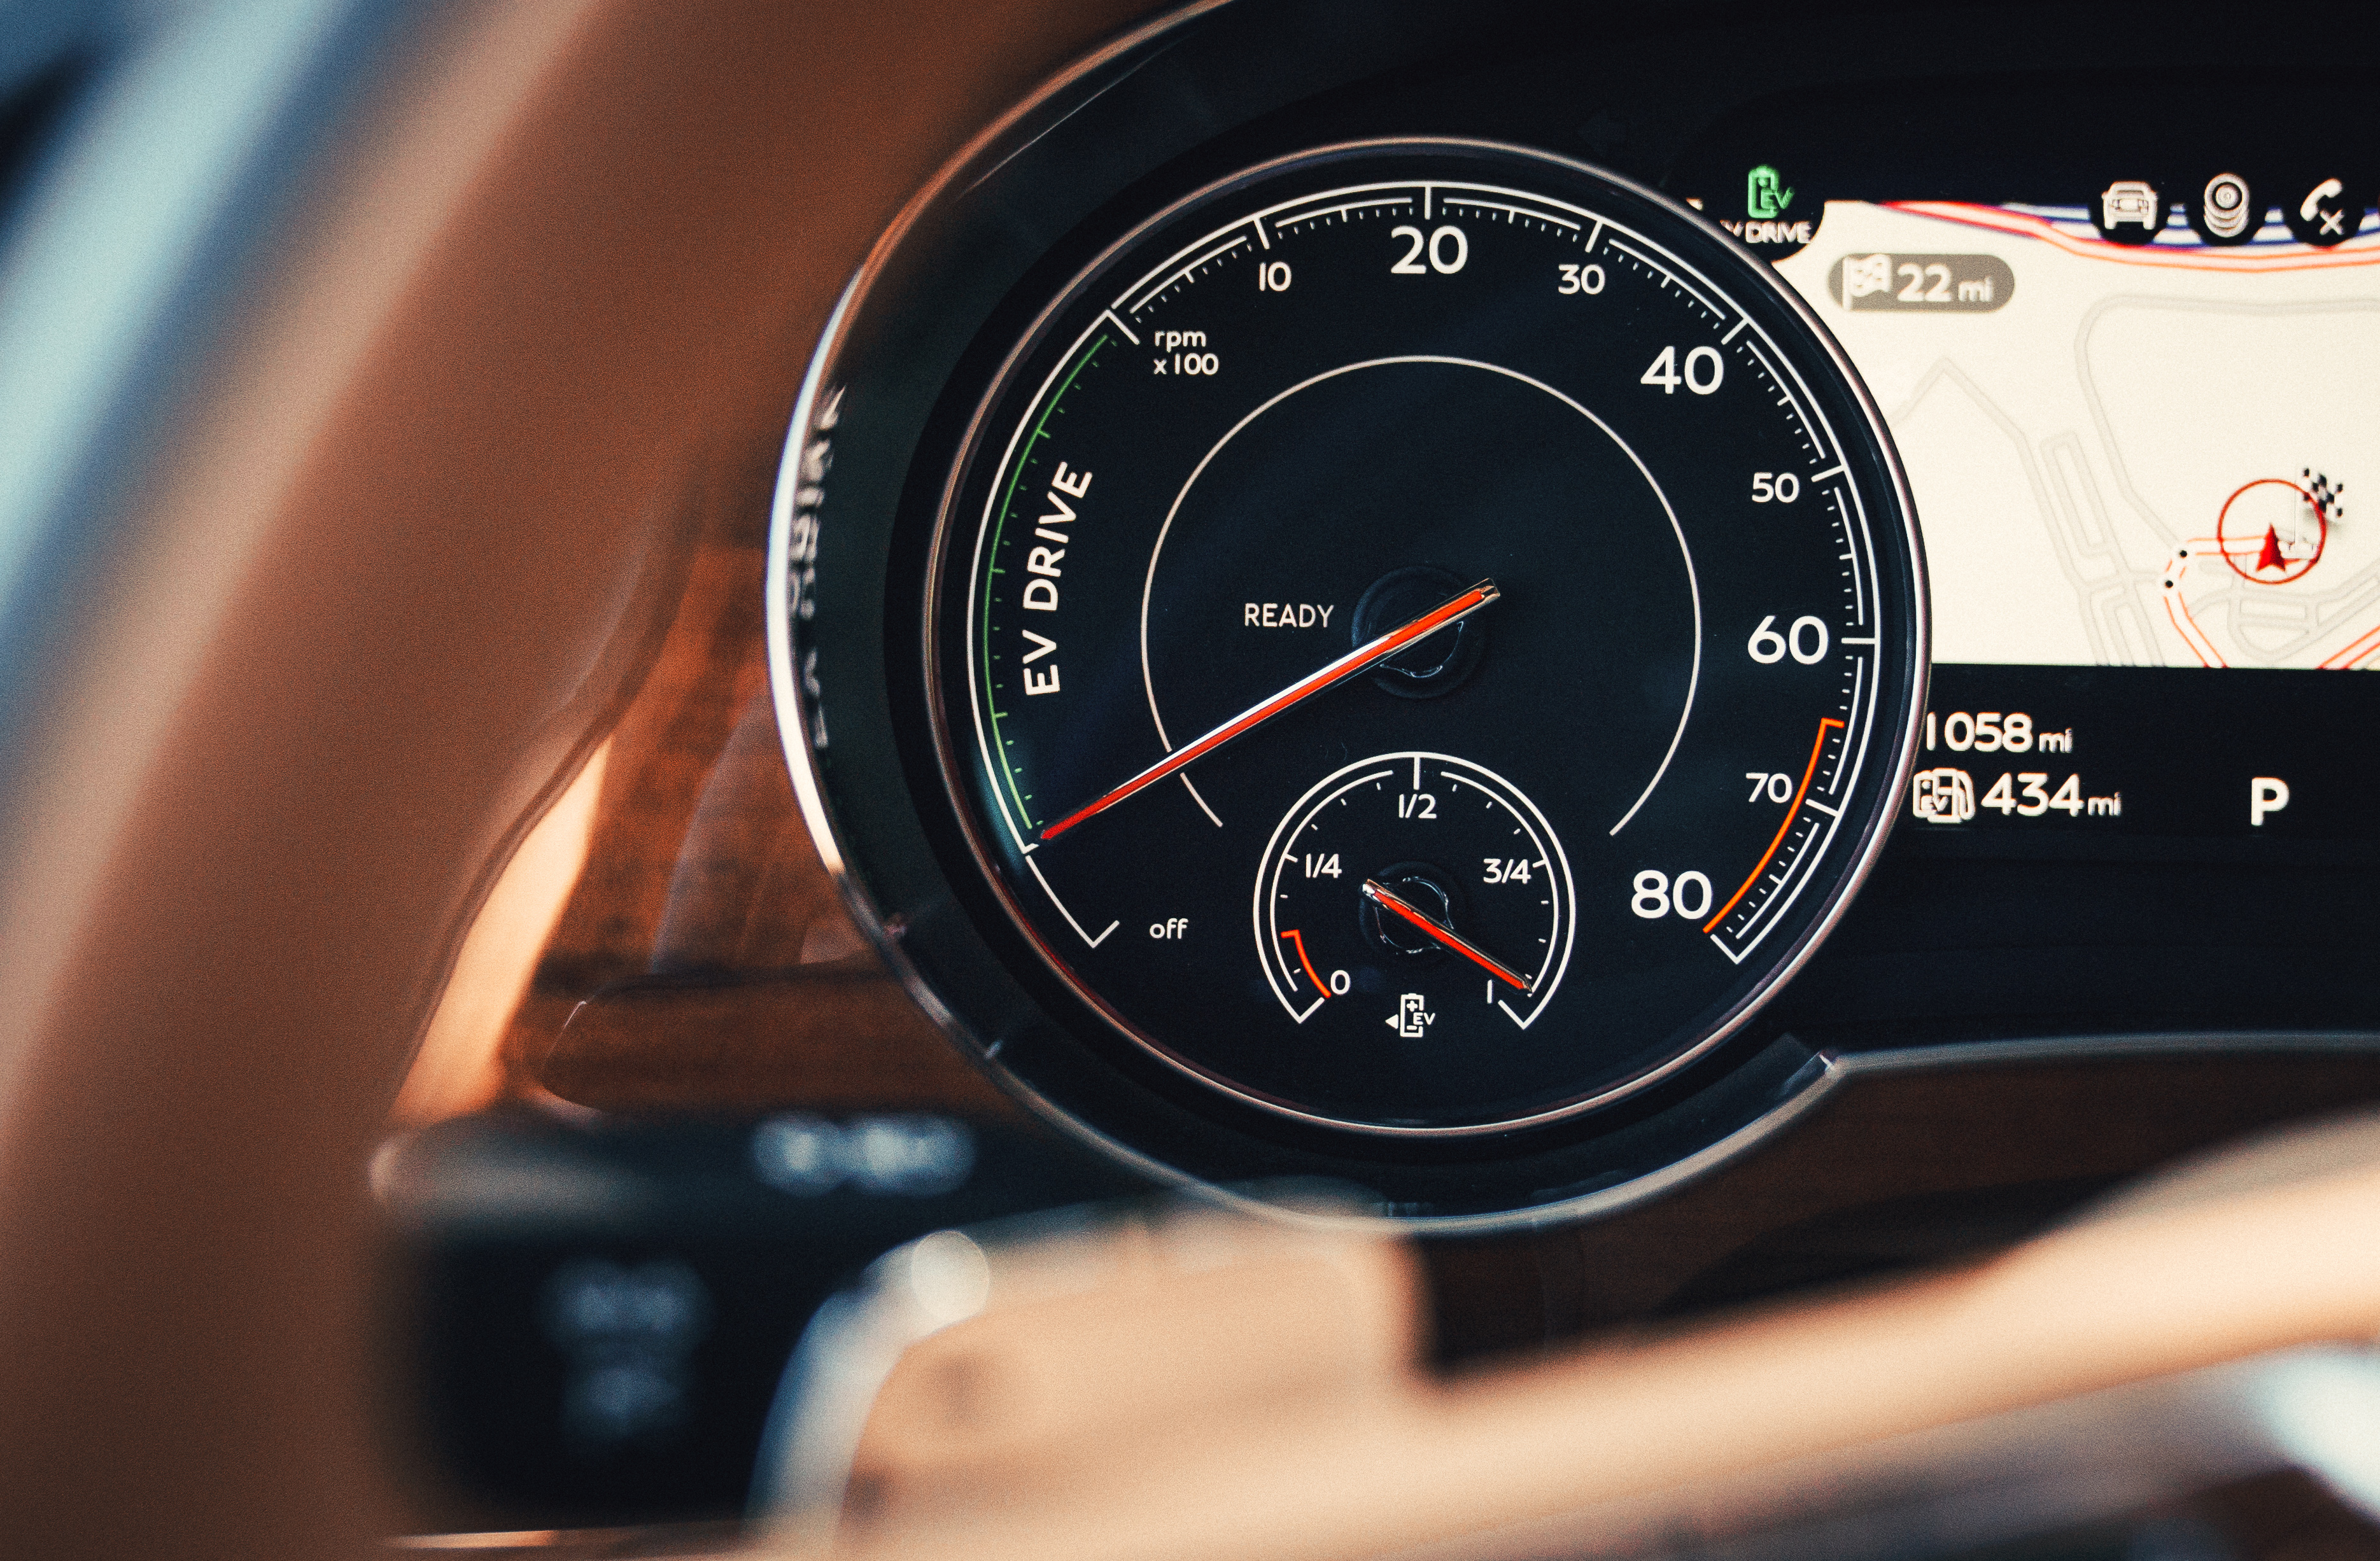 Unique hybrid-related dials are fitted to the Bentayga